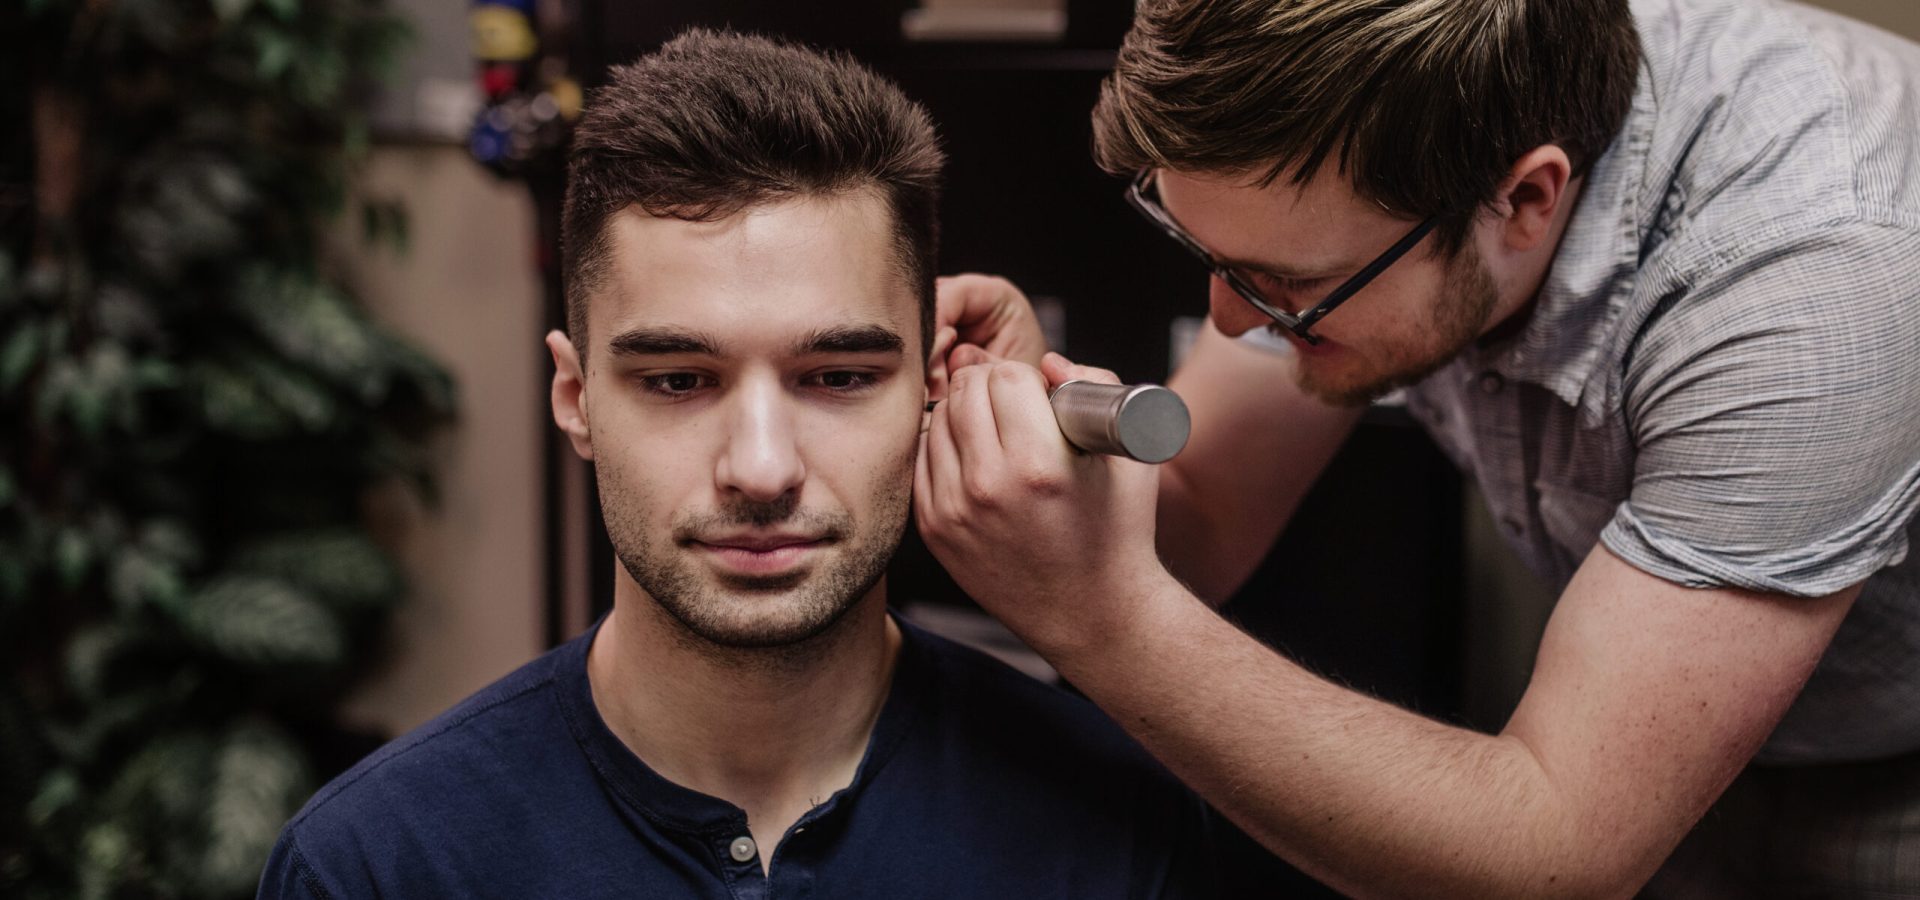 Hearing aid practitioner performing a hearing test on a younger male patient